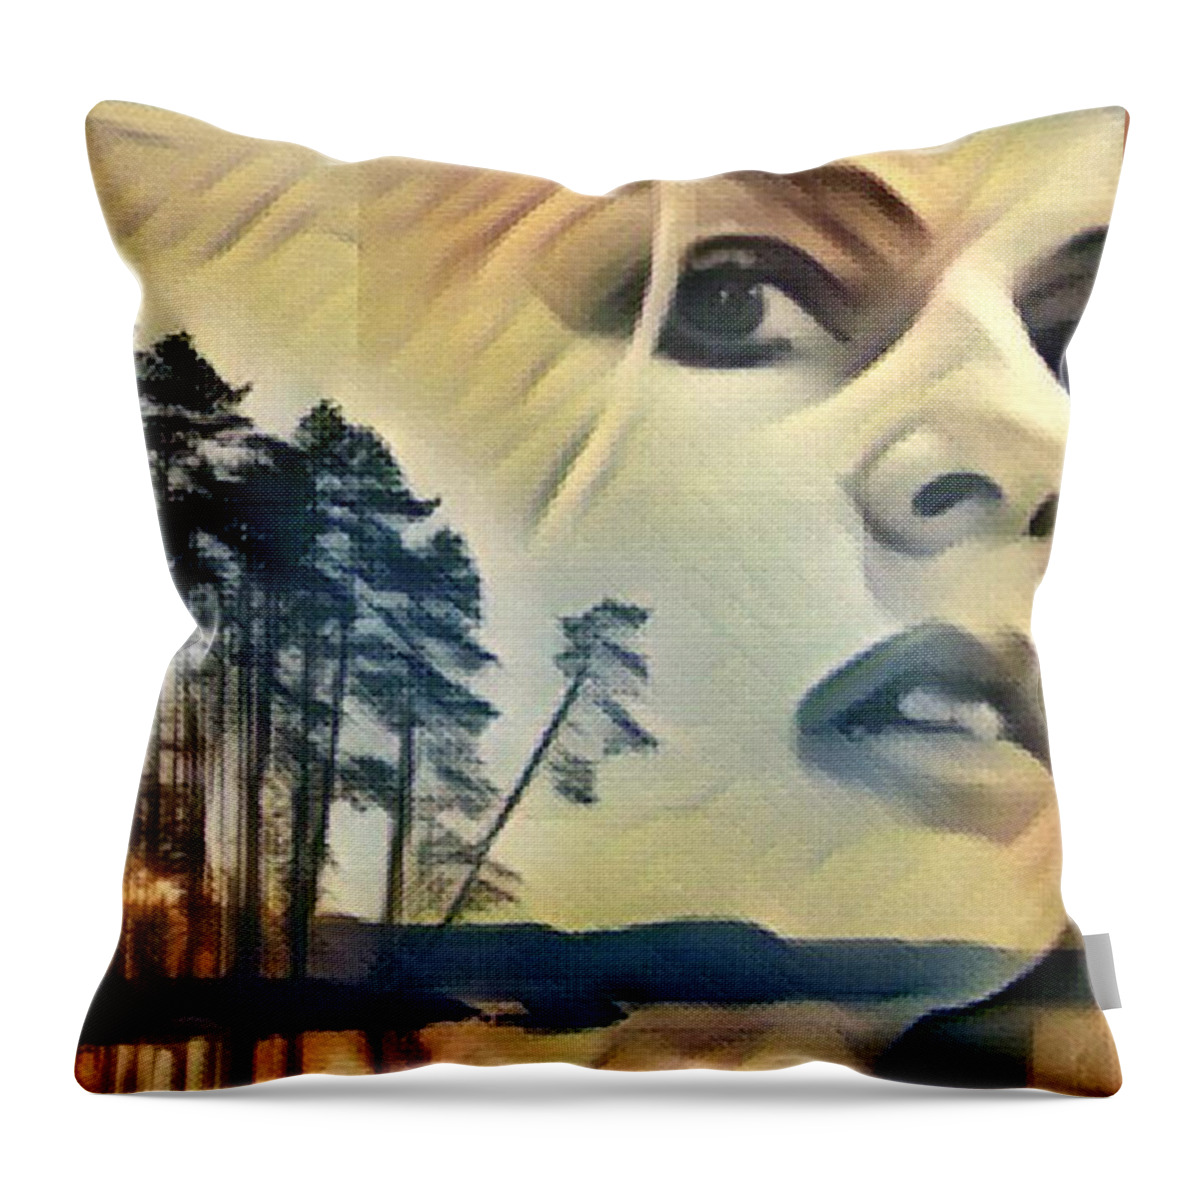 Fineartamerica Throw Pillow featuring the digital art Fantasy art by Yvonne Padmos